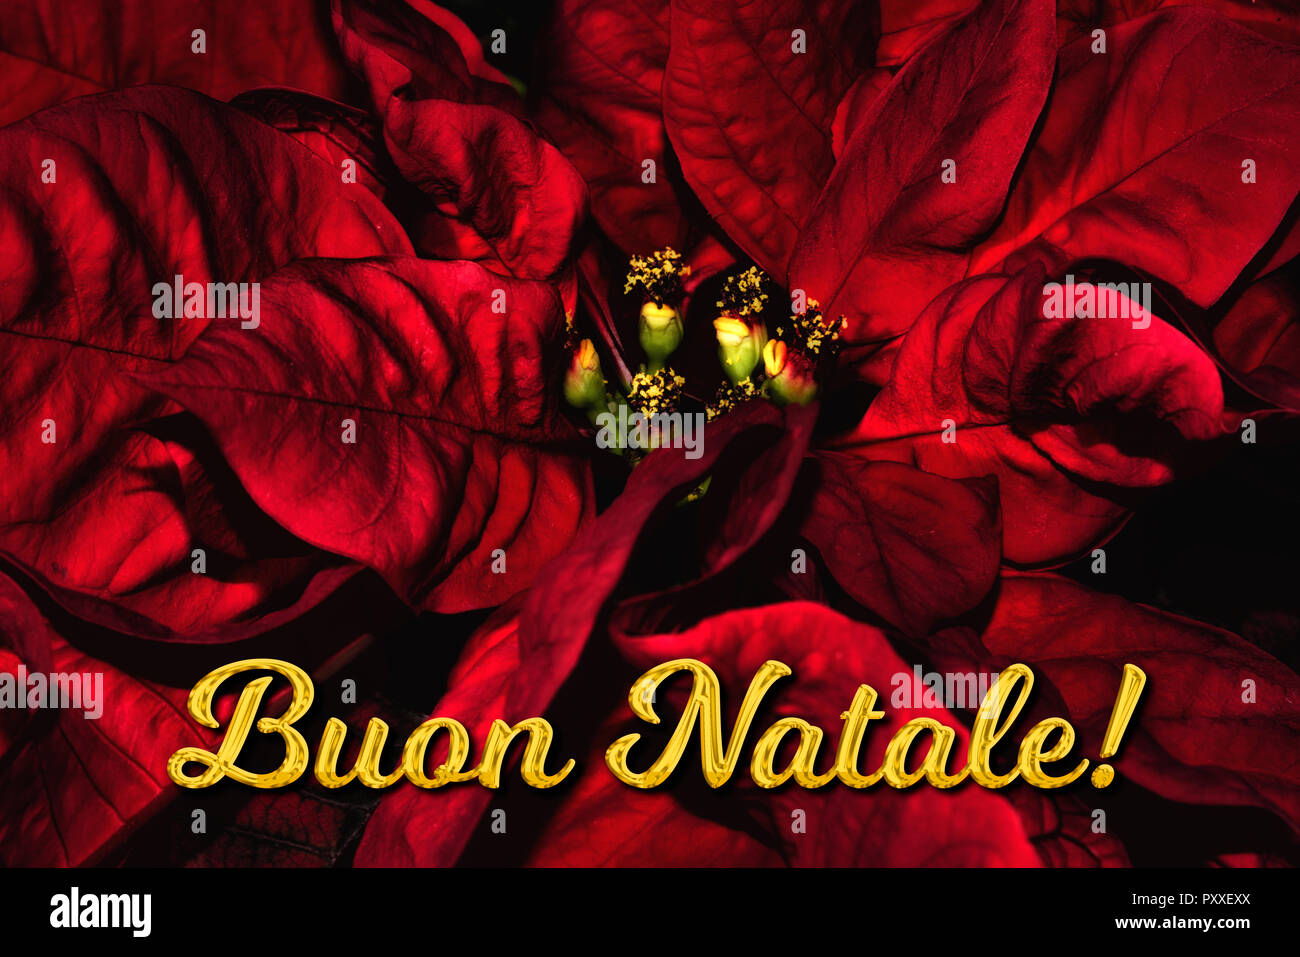 Bilder Buon Natale.The Italian Text Buon Natale Means Merry Christmas Which Is In Front Of A Red Poinsettia The Perfect Holiday Season Greetings Card Stock Photo Alamy